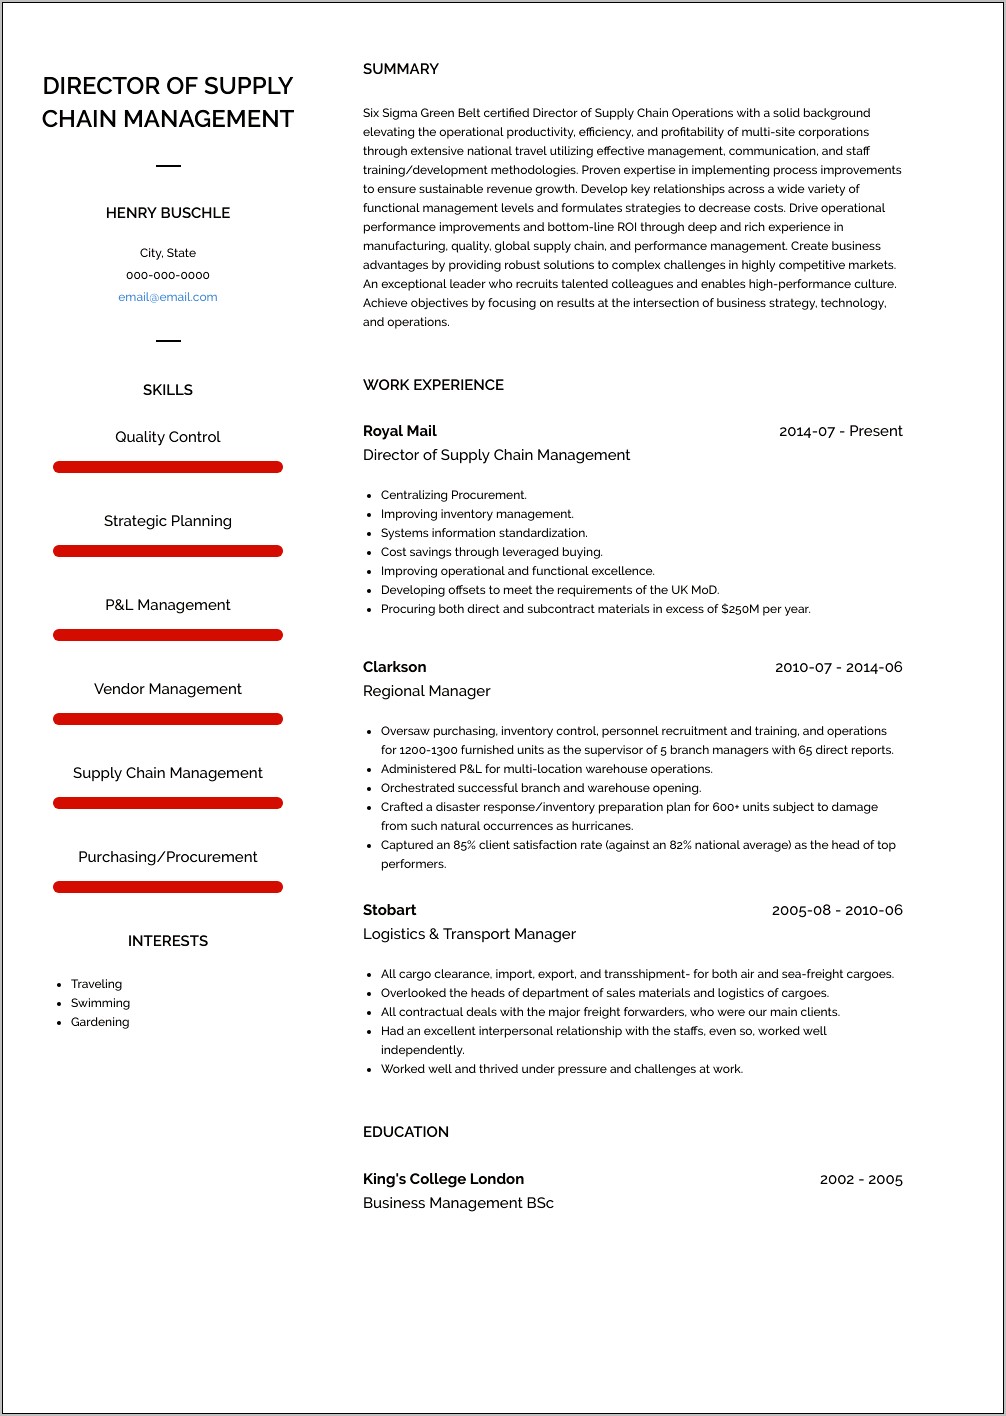 Active Supply Chain Group Member Resume Example